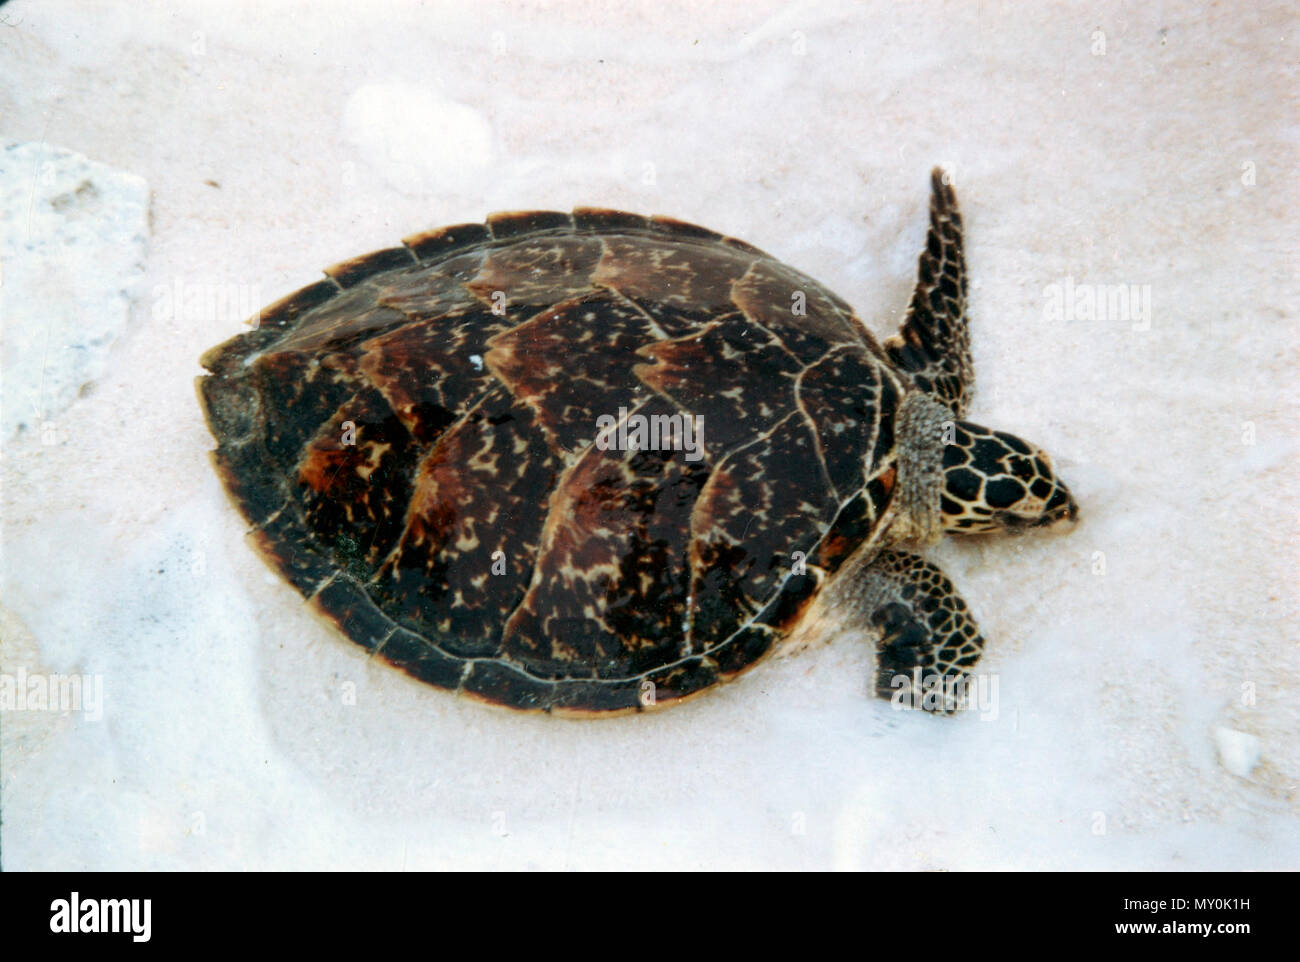 Hawksbill turtle, Heron Island, c 1980. The hawksbill (Eretmochelys imbricata) is a critically endangered sea turtle found predominantly in tropical reefs of the Indian, Pacific, and Atlantic Oceans. Stock Photo